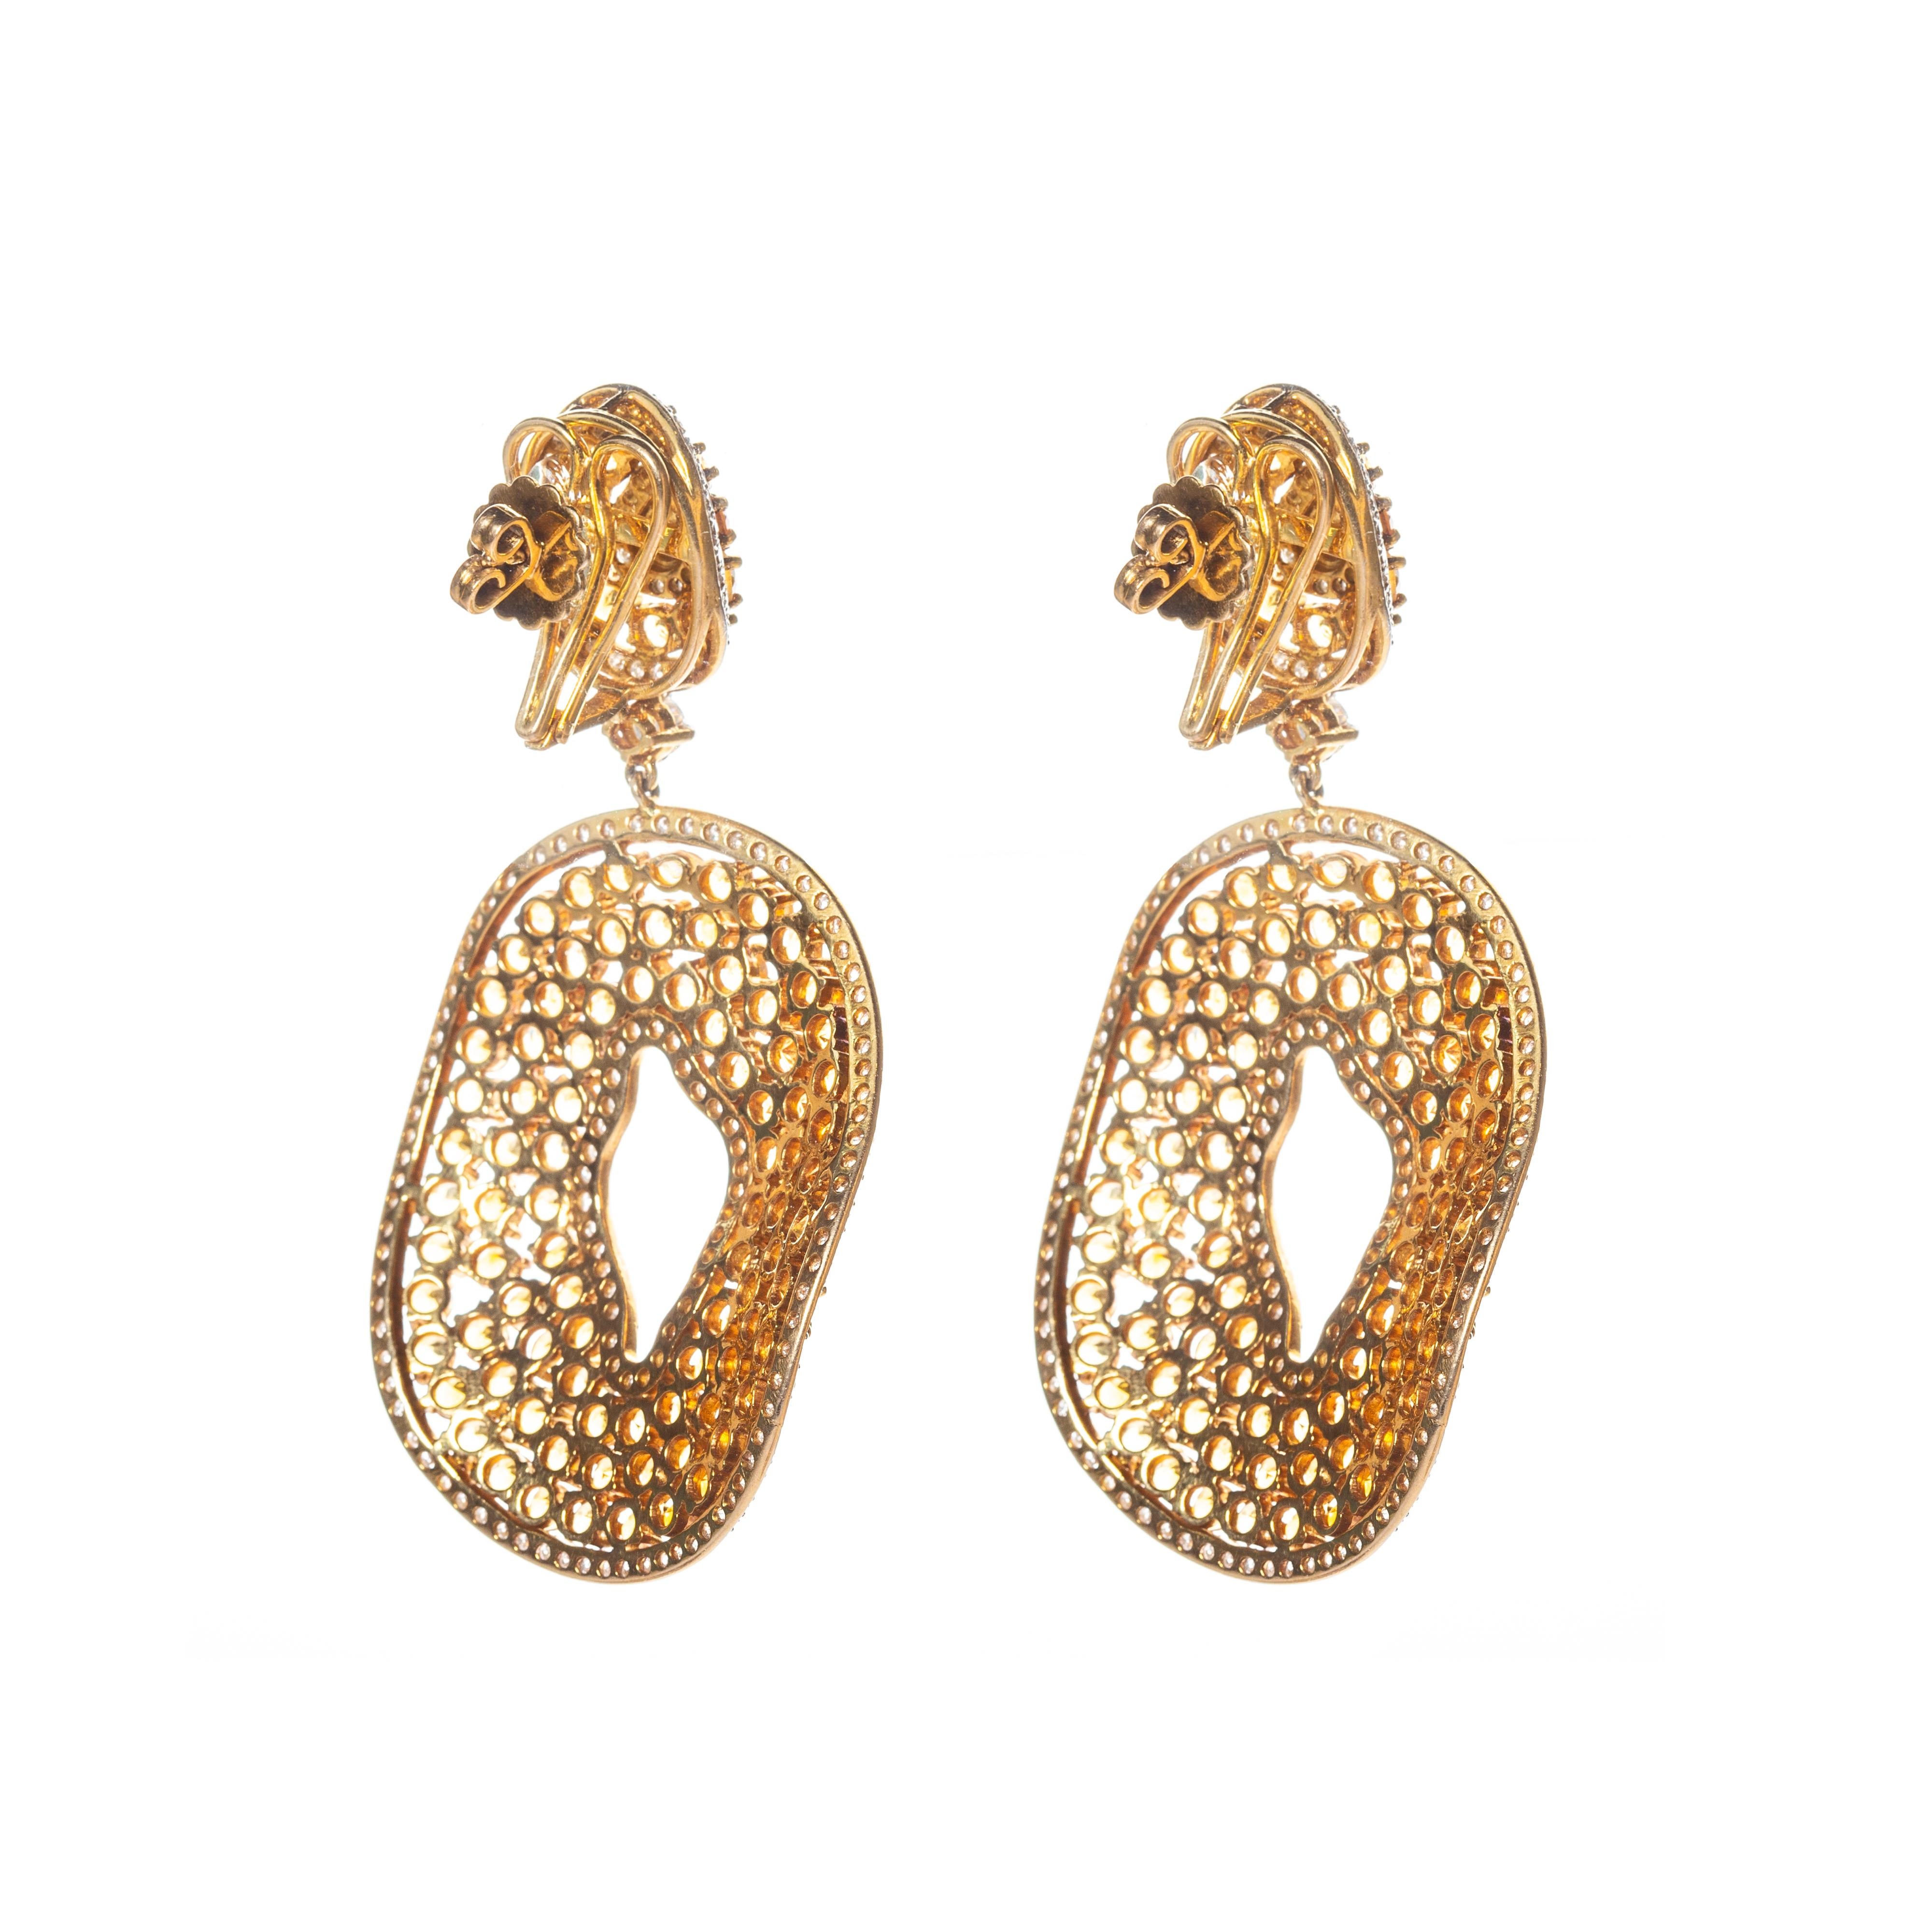 Brilliant Cut Citrine and Diamond Sweeter than Honey Earrings in 18 Karat Gold For Sale